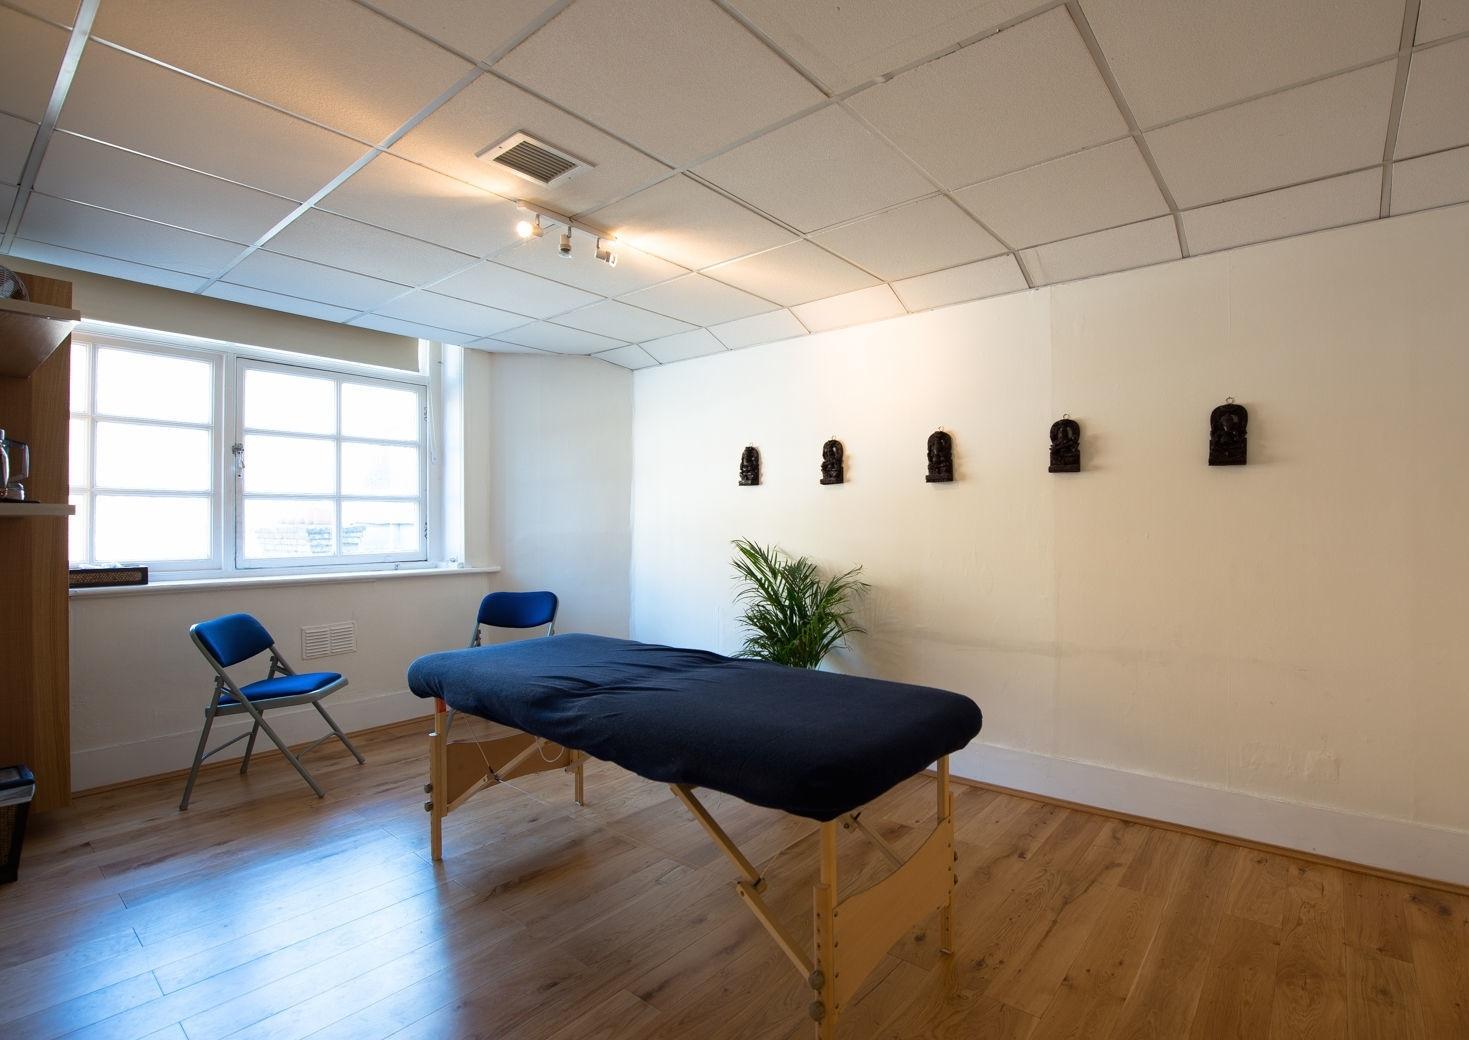 Therapy Room 2, Stillpoint photo #1